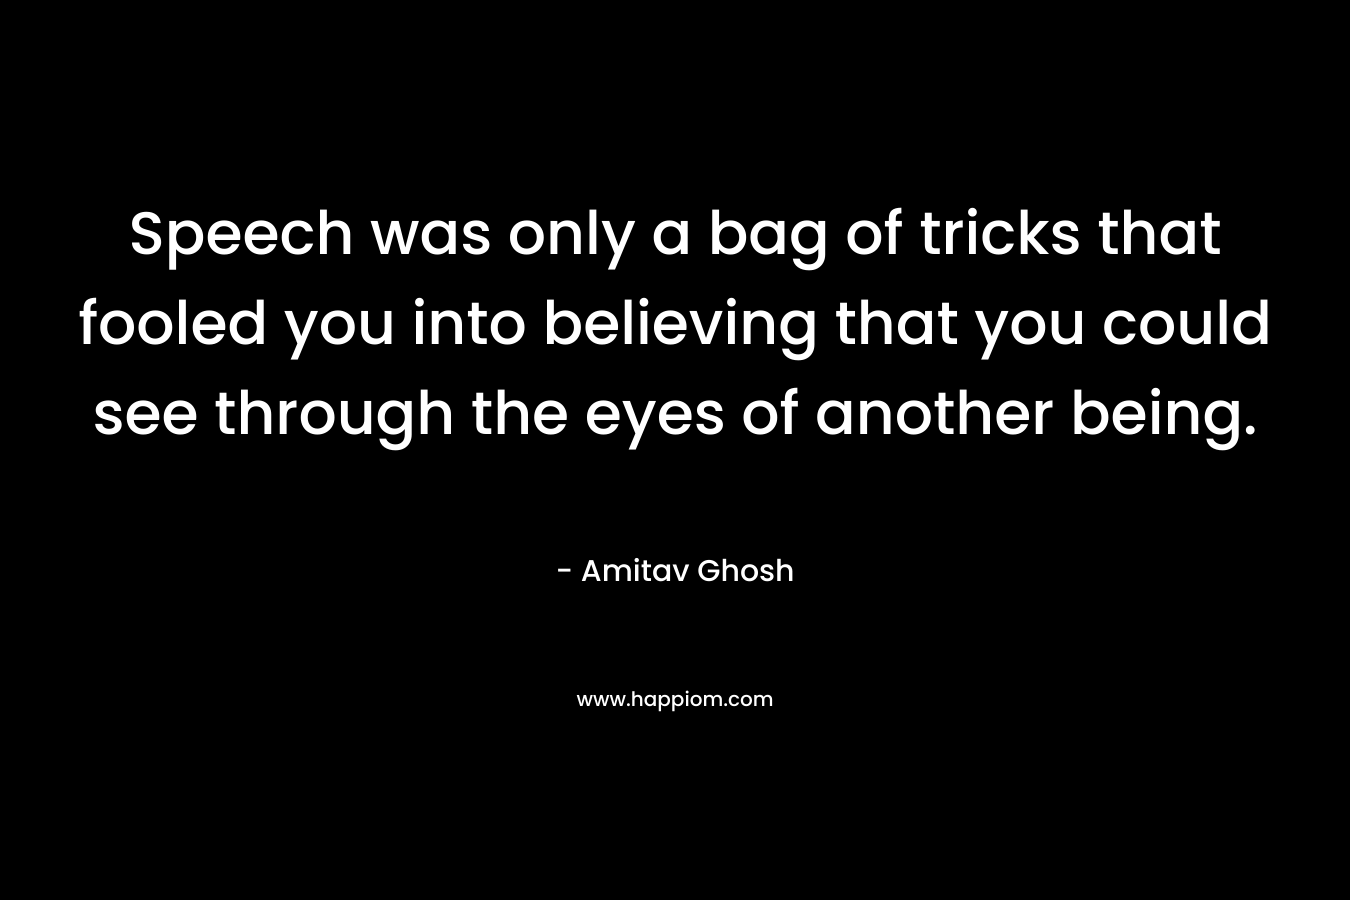 Speech was only a bag of tricks that fooled you into believing that you could see through the eyes of another being. – Amitav Ghosh